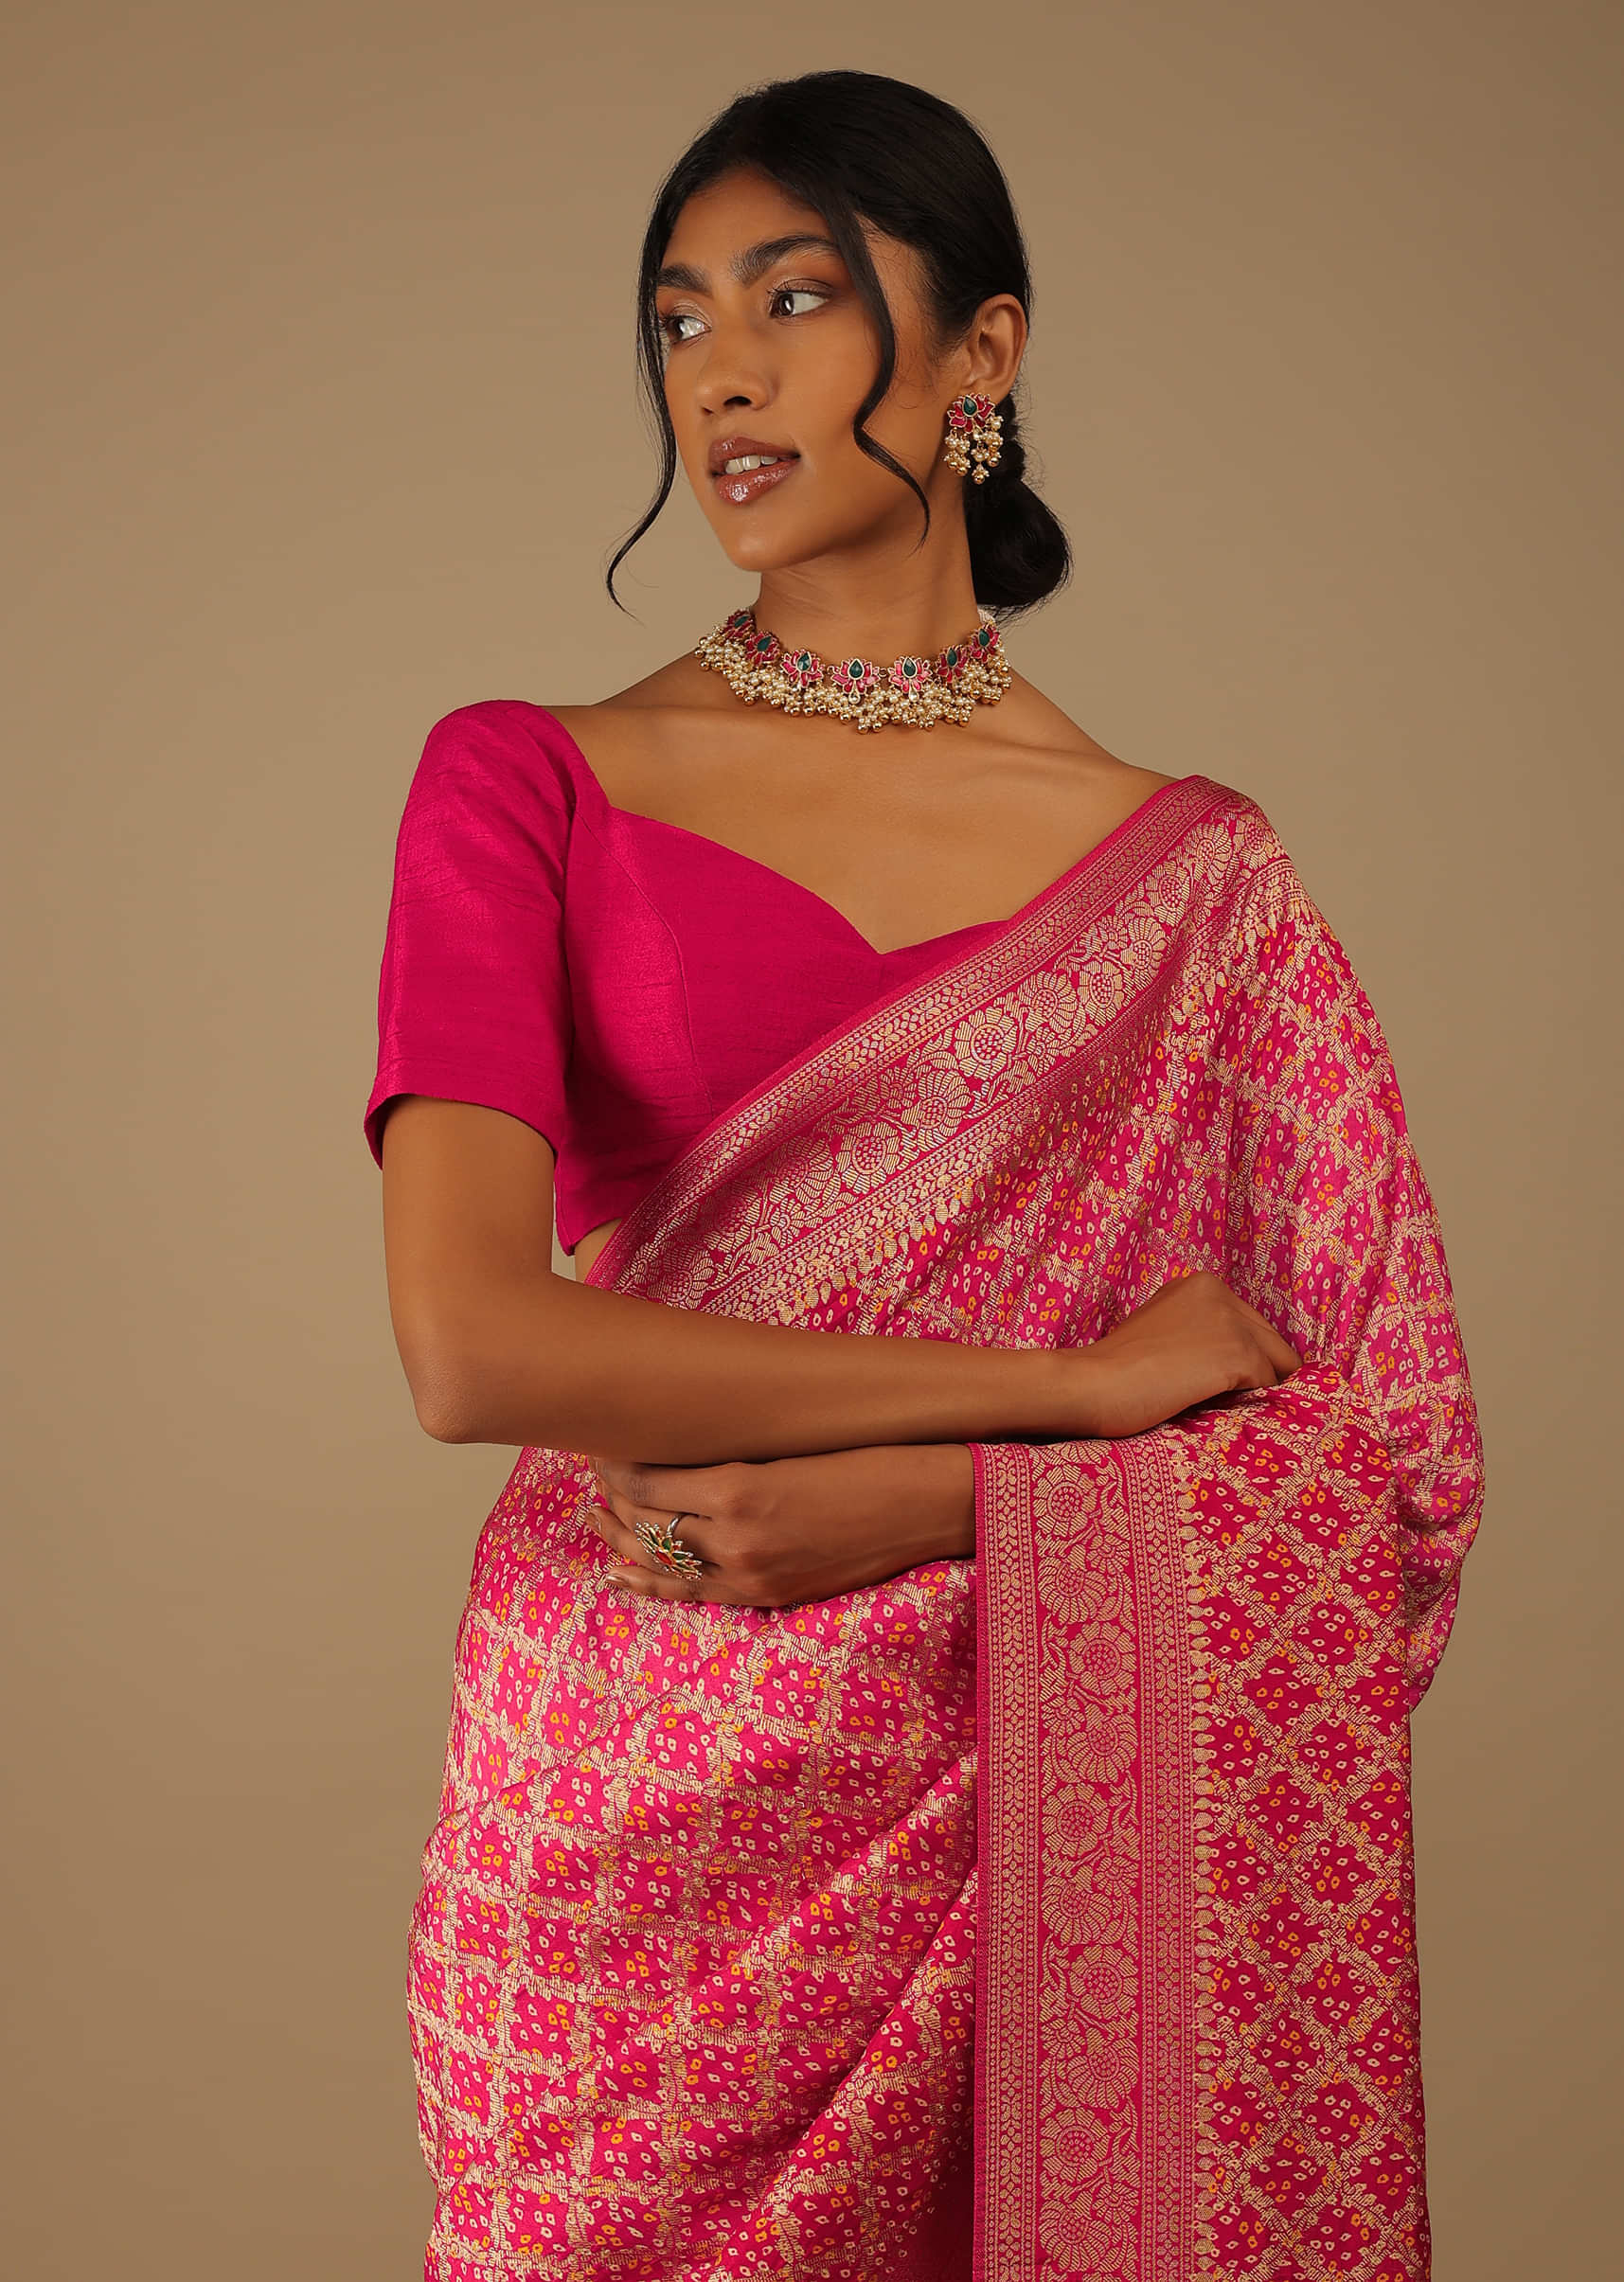 Pink And Red Saree In Digital Bandhani Print,Crafted In Brocade Silk With Zari Embroidery